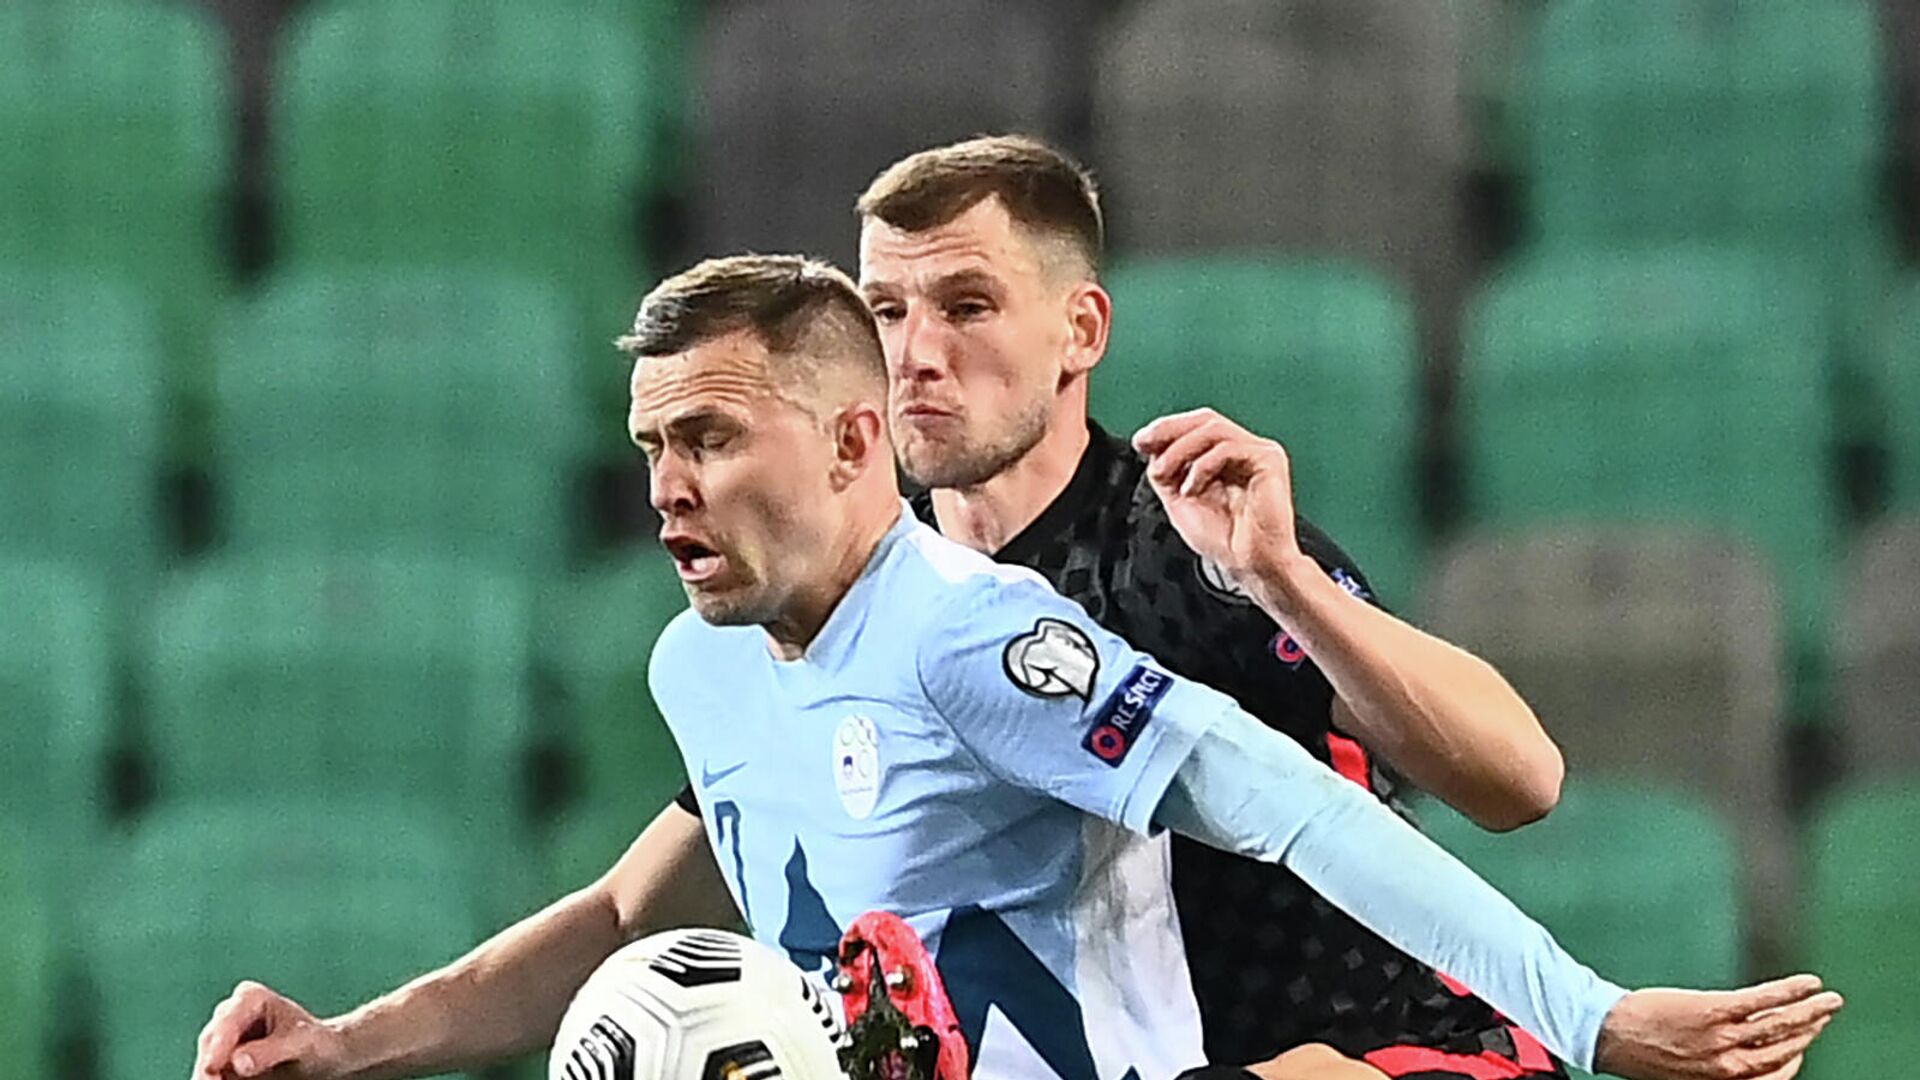 Slovenia's midfielder Josip Ilicic (L) fights for the ball with and Croatia's defender Borna Barisic during the FIFA World Cup Qatar 2022 Group H qualification football match between Slovenia and Croatia at The Stozice Stadium in Ljubljana, Slovenia, on March 24, 2021. (Photo by JOE KLAMAR / AFP) - РИА Новости, 1920, 25.03.2021